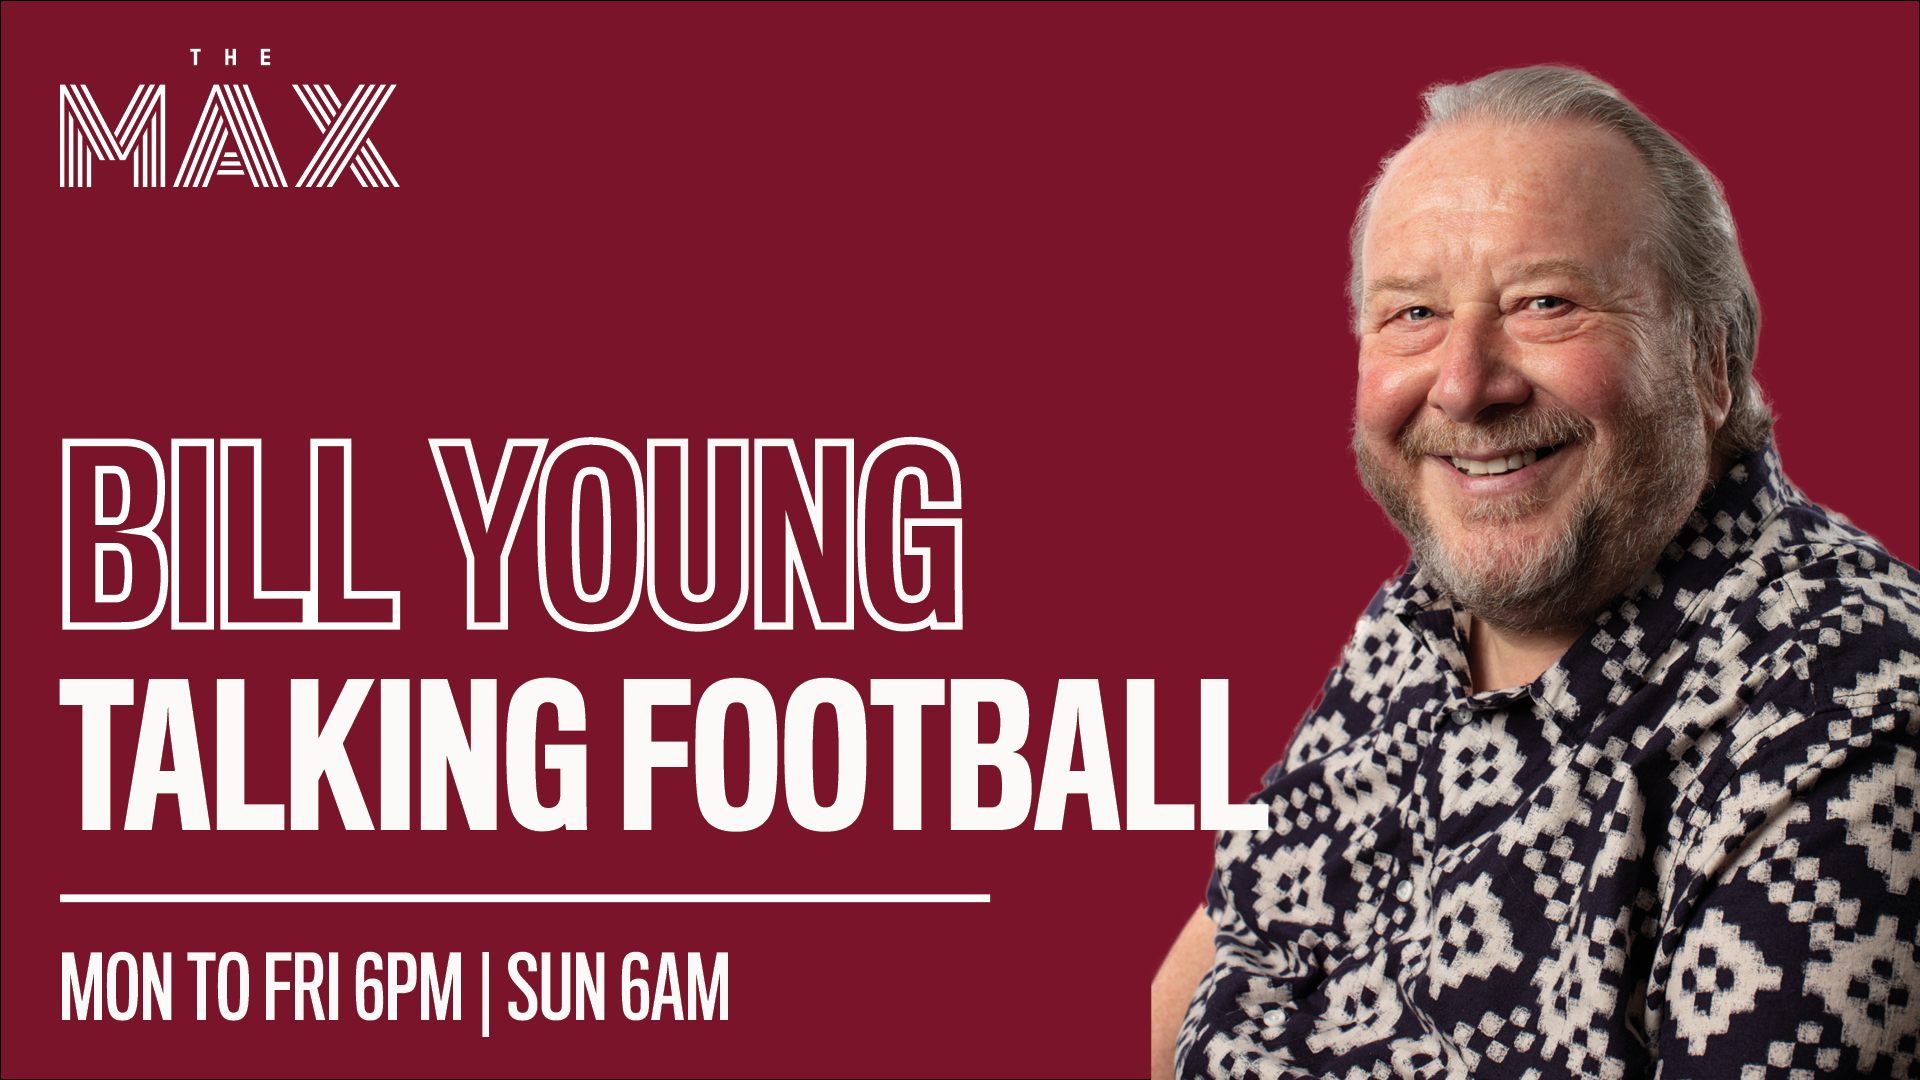 Talking Football with Bill Young - Thursday 11th February